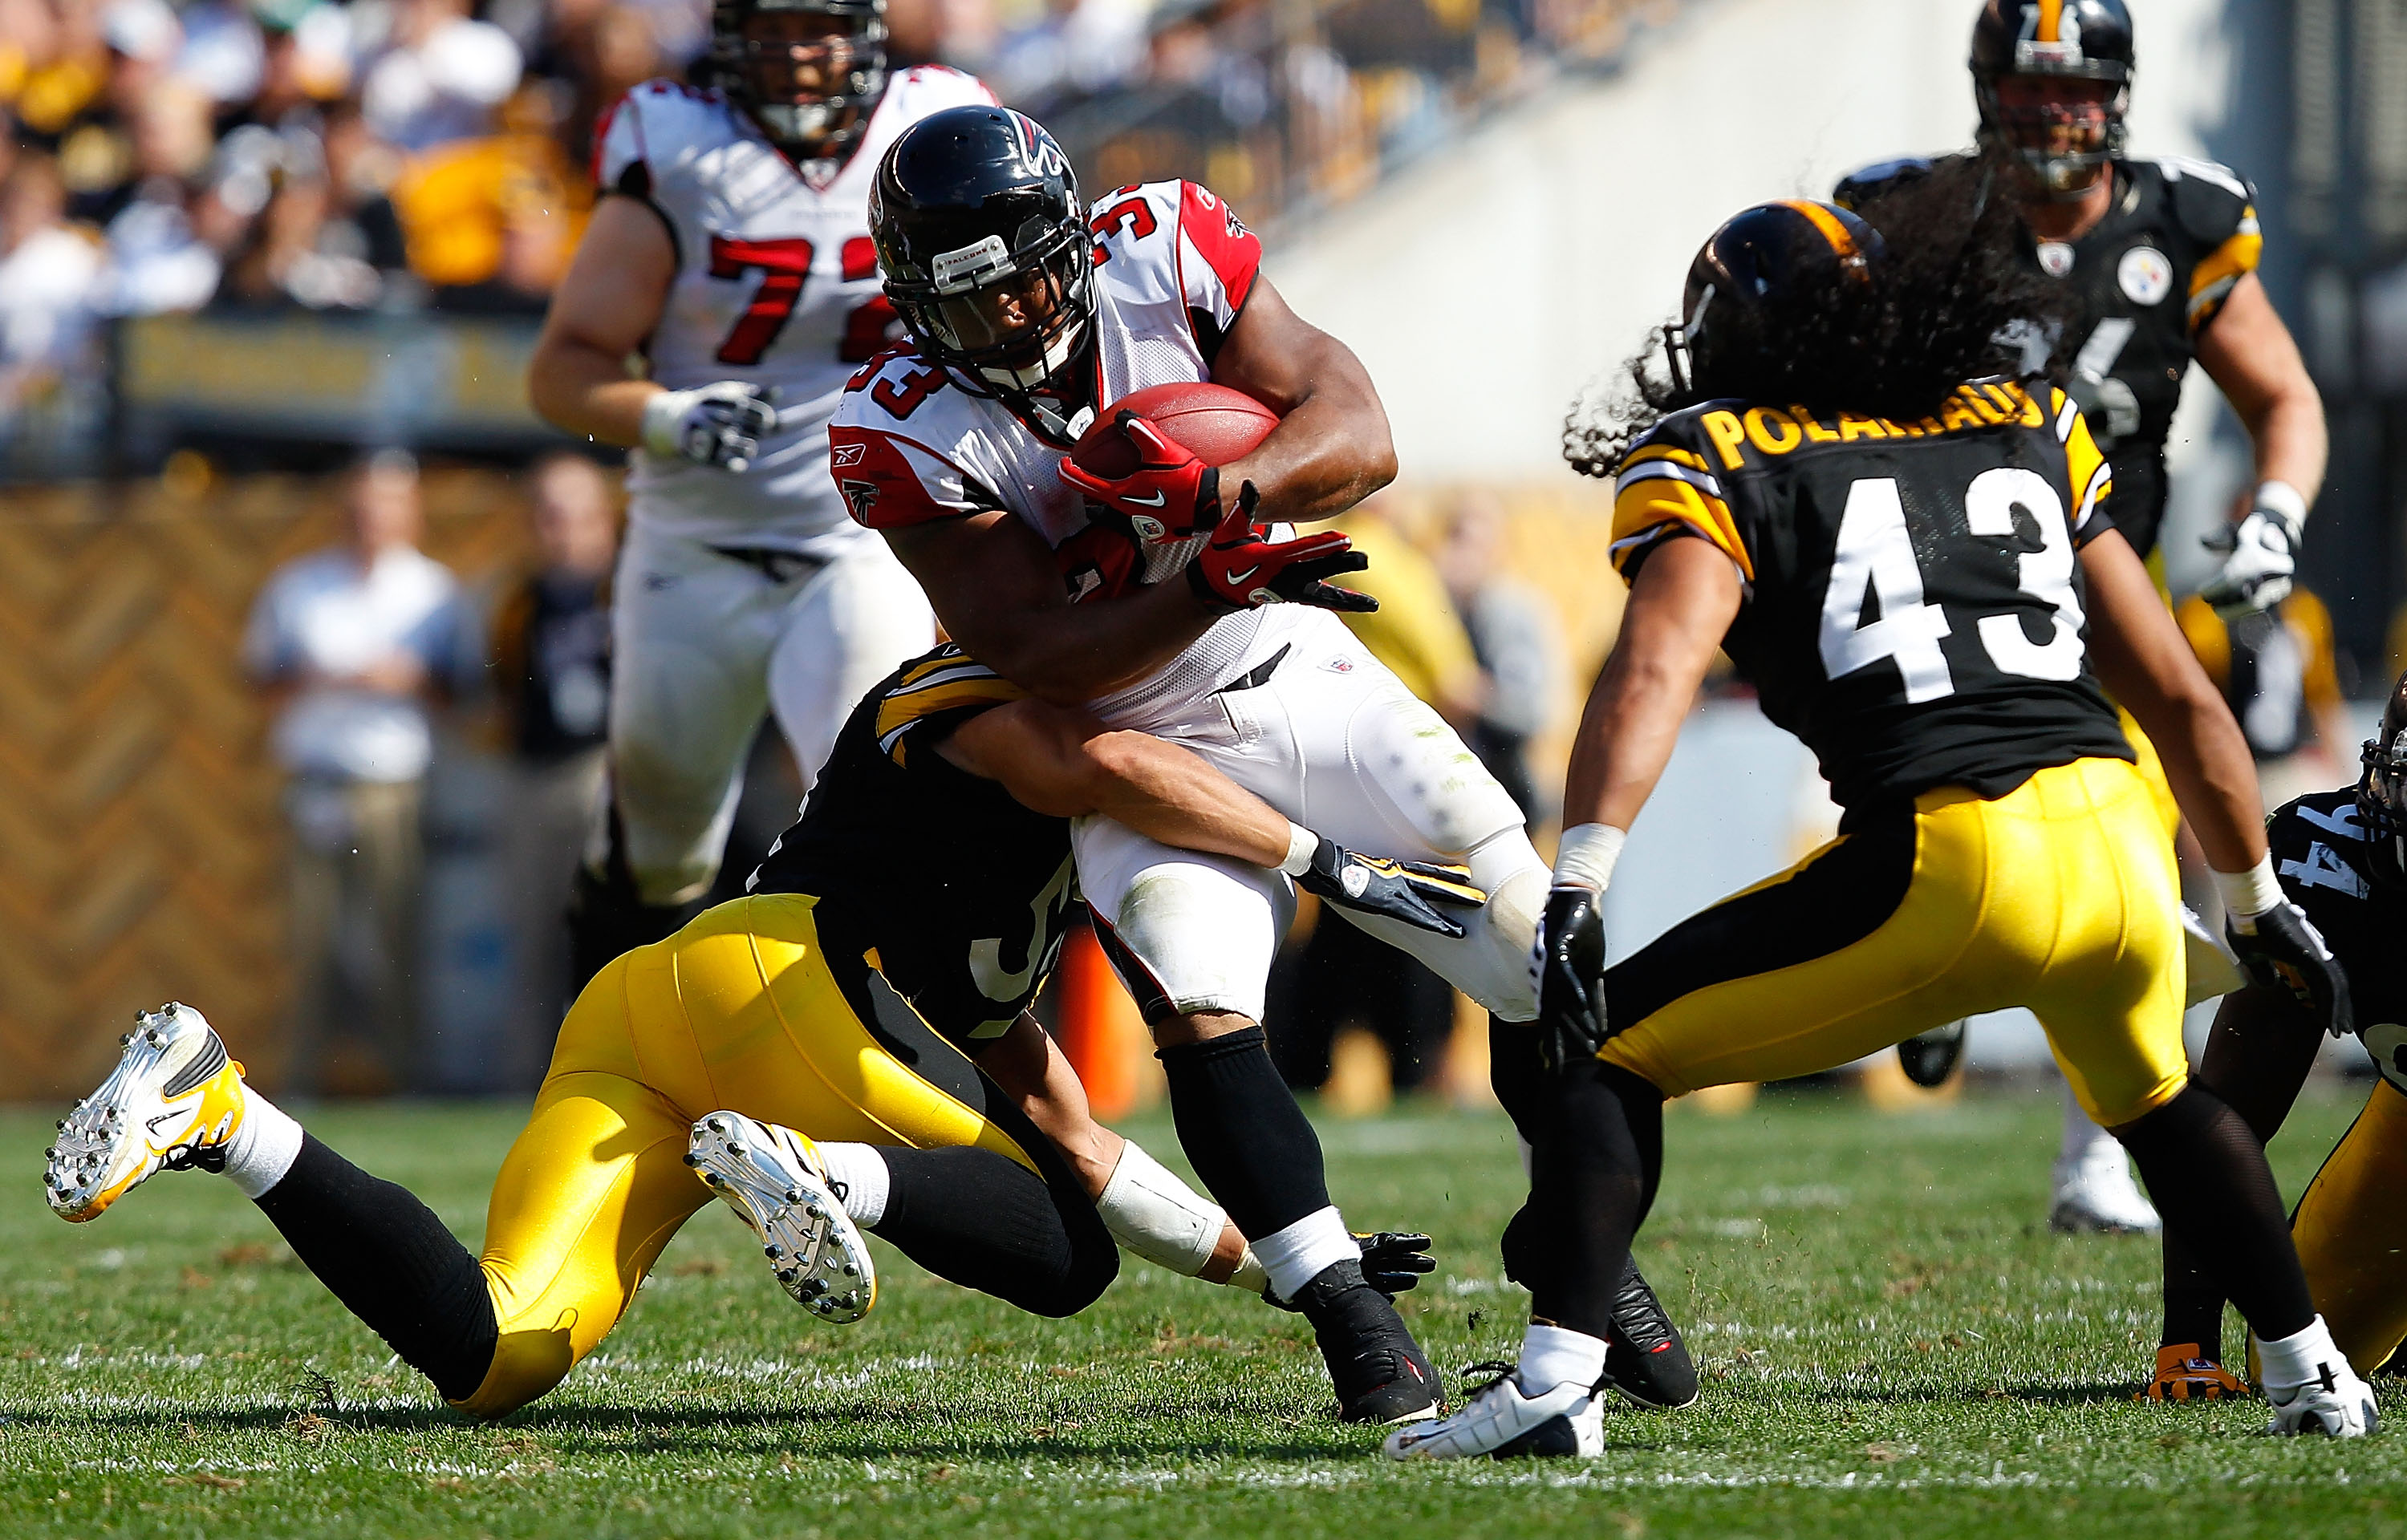 PITTSBURGH - SEPTEMBER 12:  Michael Turner #33 of the Atlanta Falcons attempts to run through a tackle by James Farrior #51 of the Pittsburgh Steelers during the NFL season opener game on September 12, 2010 at Heinz Field in Pittsburgh, Pennsylvania.  (Ph